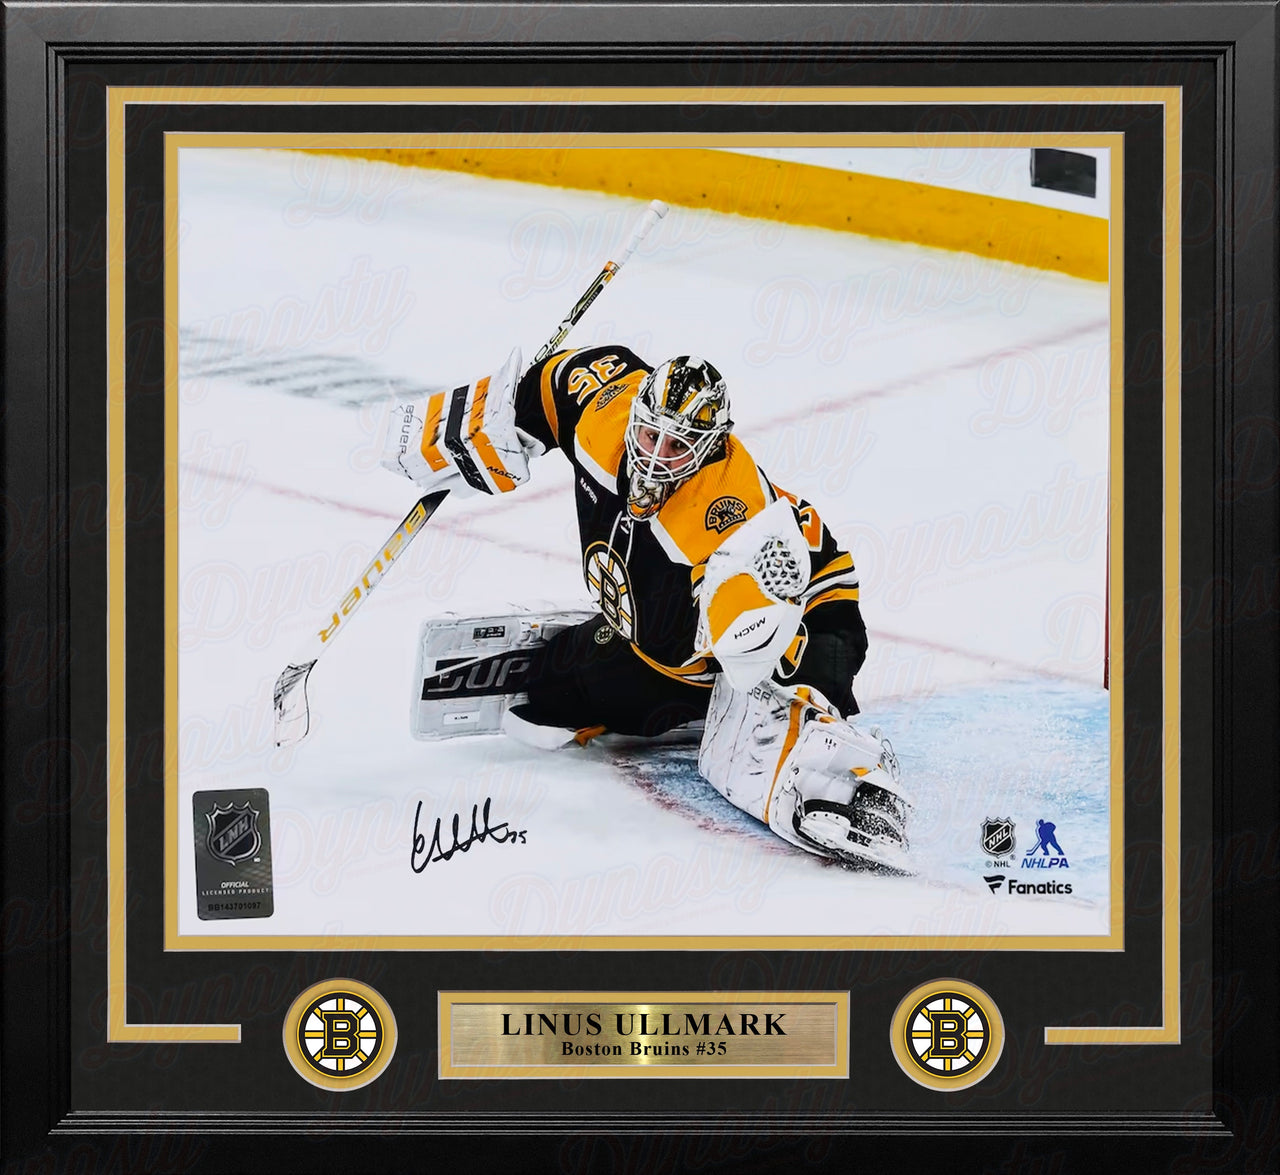 Official Jeremy Swayman And Linus Ullmark Win Hug Repeat Boston Bruins  signatures Shirt - teejeep